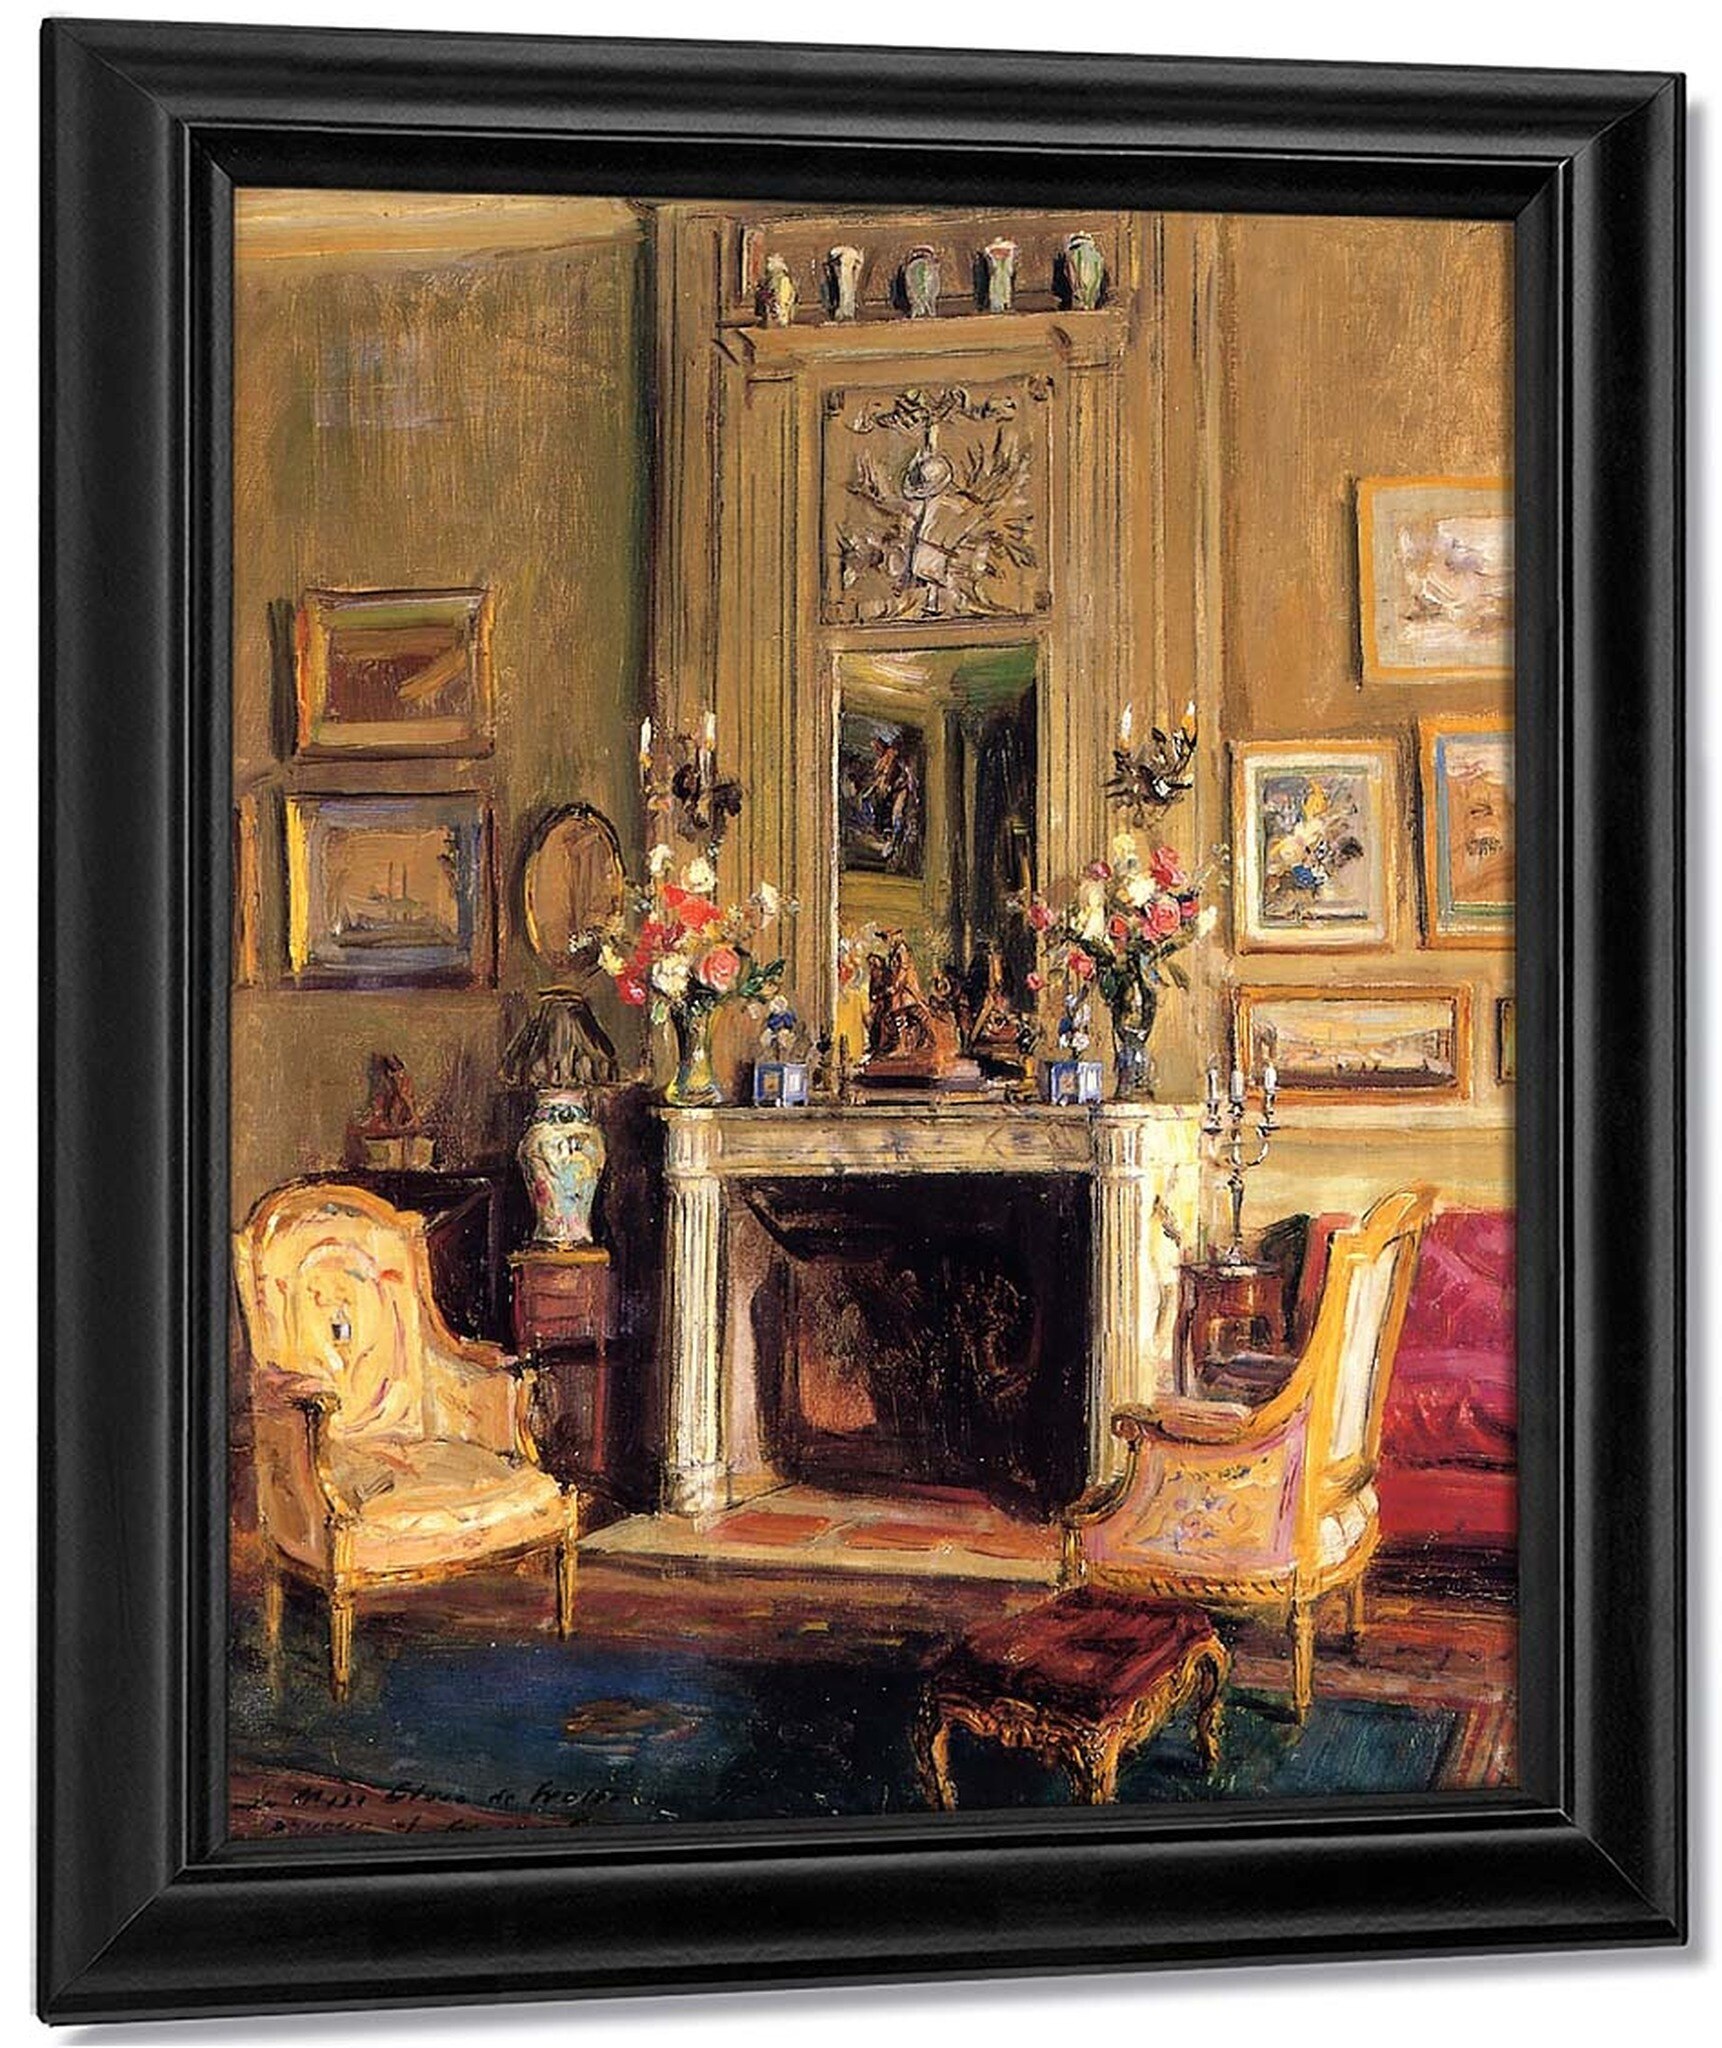 Fire Place Drawing Unique Elsie De Wolfe S Drawing Room 123 East Fifth Fifth Street New York by Walter Gay